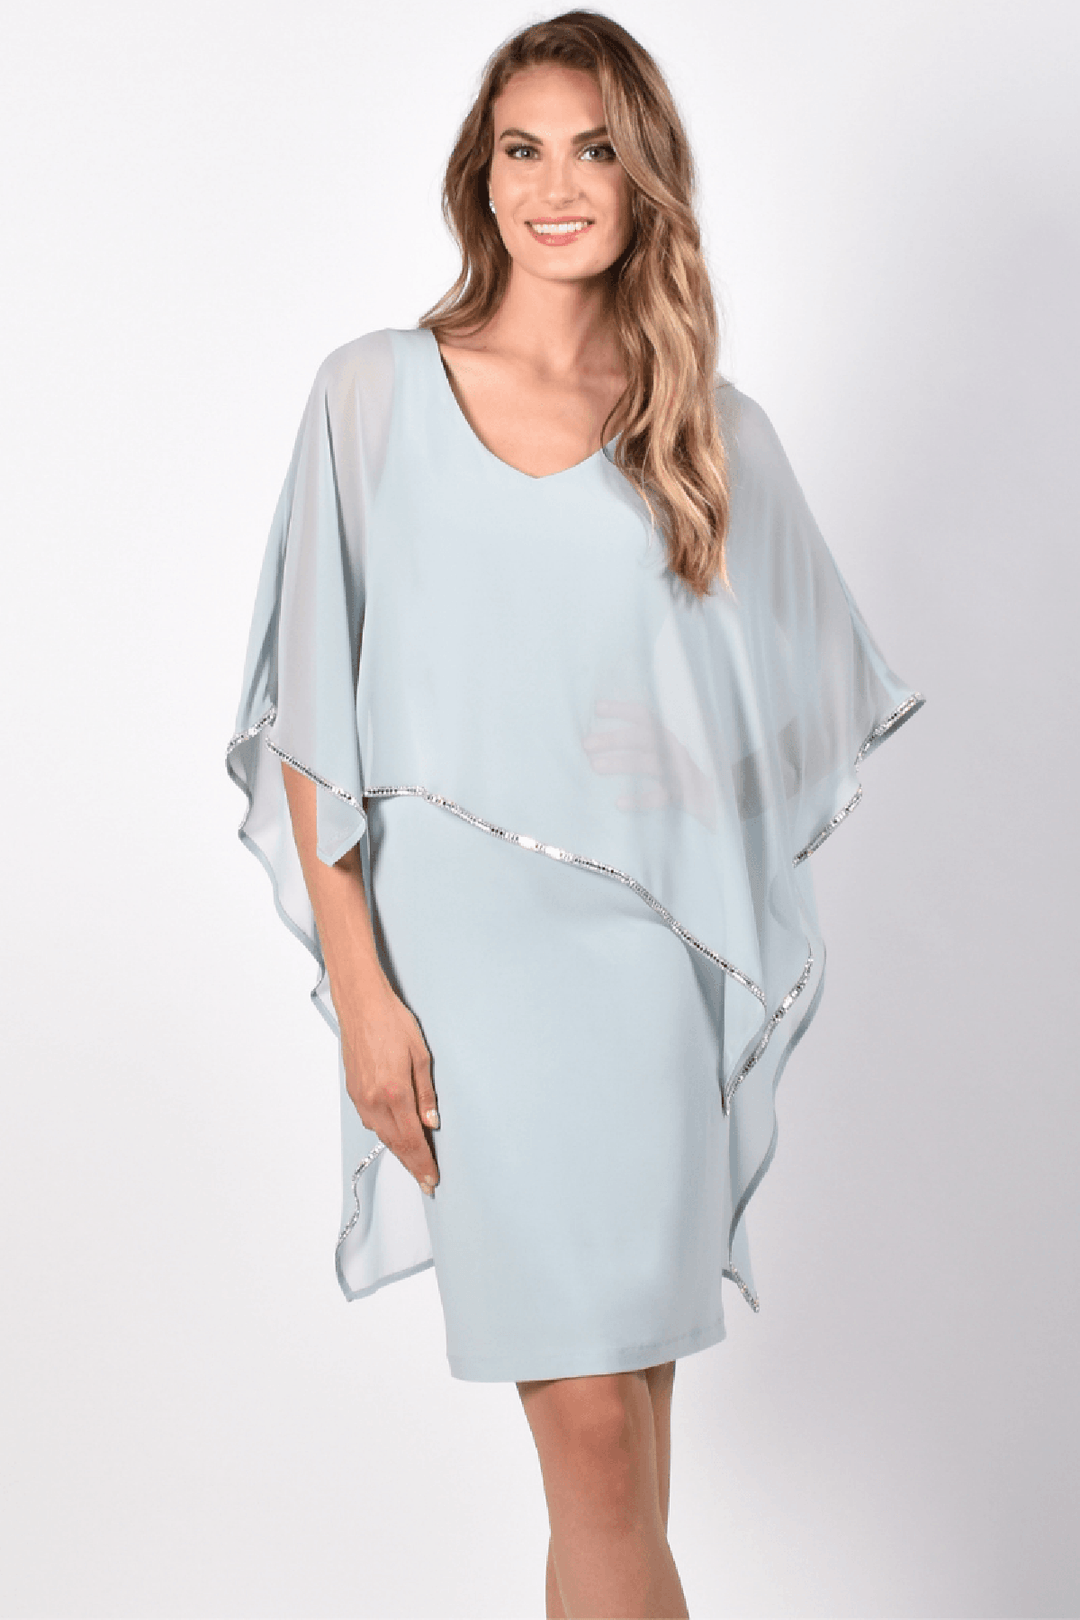 Aqua mist chiffon layer dress by Frank Lyman, sold and shipped from Pizazz Boutique Nelson Bay